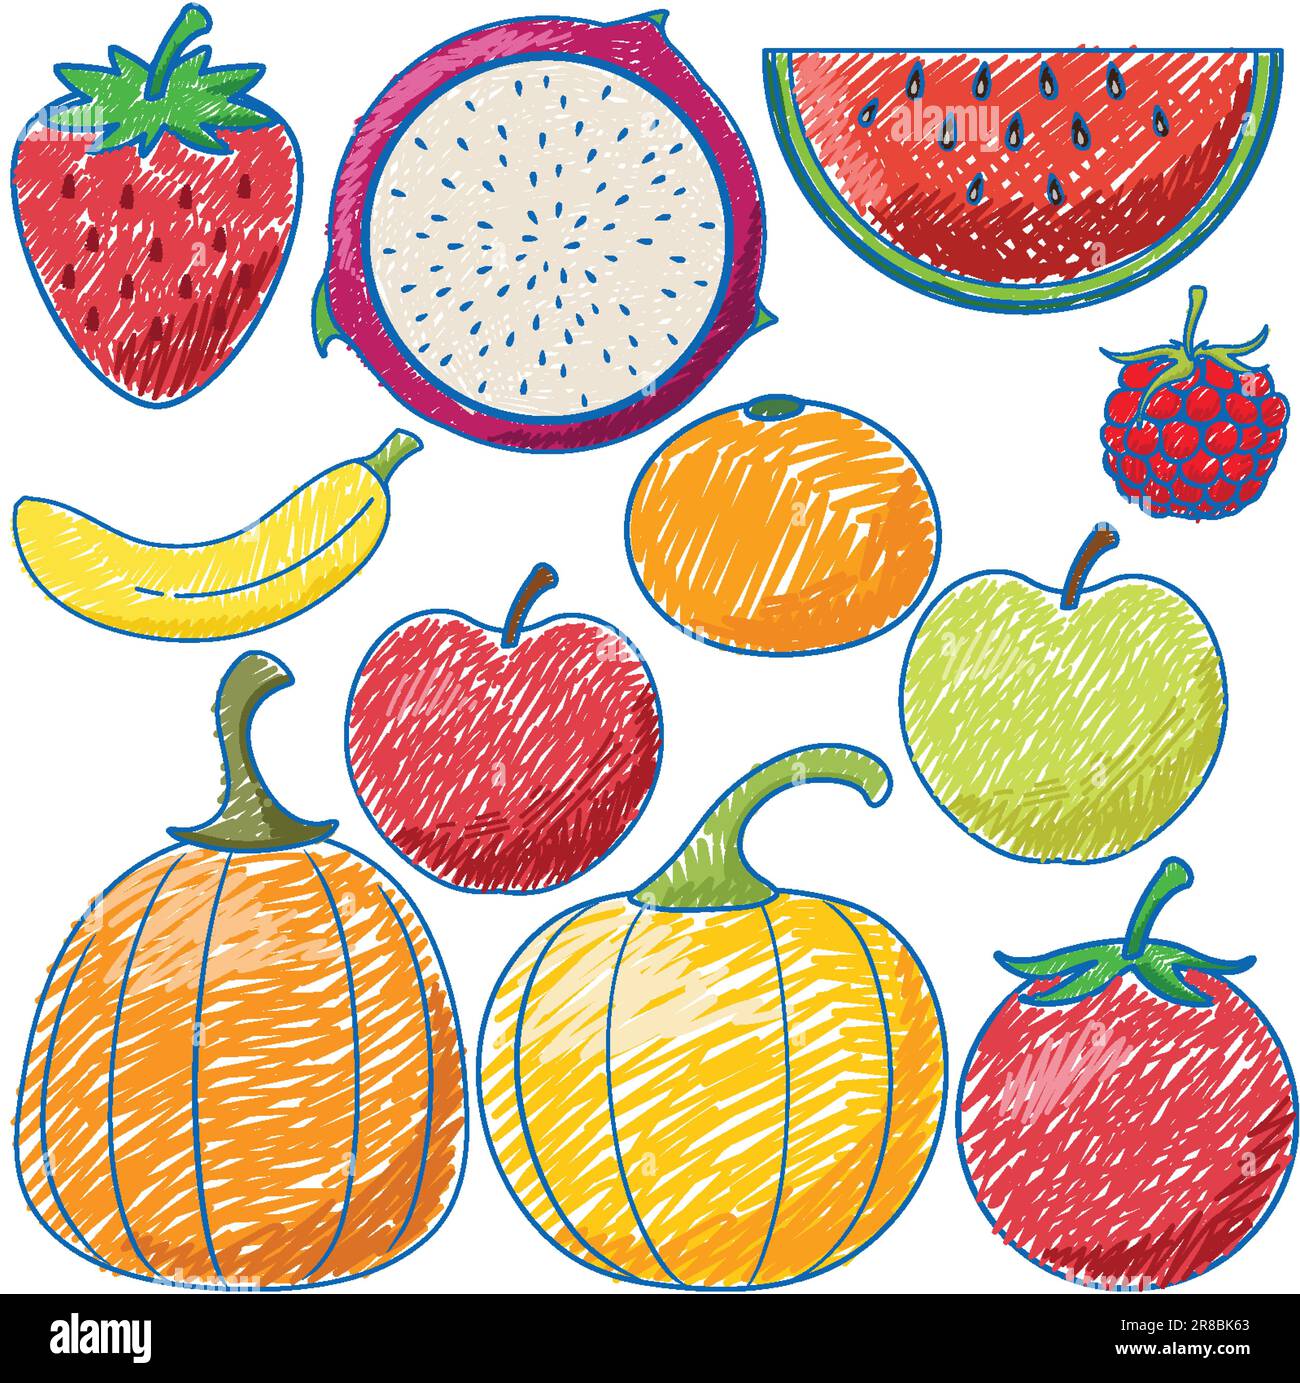 35 Easy Fruit Drawing Ideas for Beginers - Choose Marker